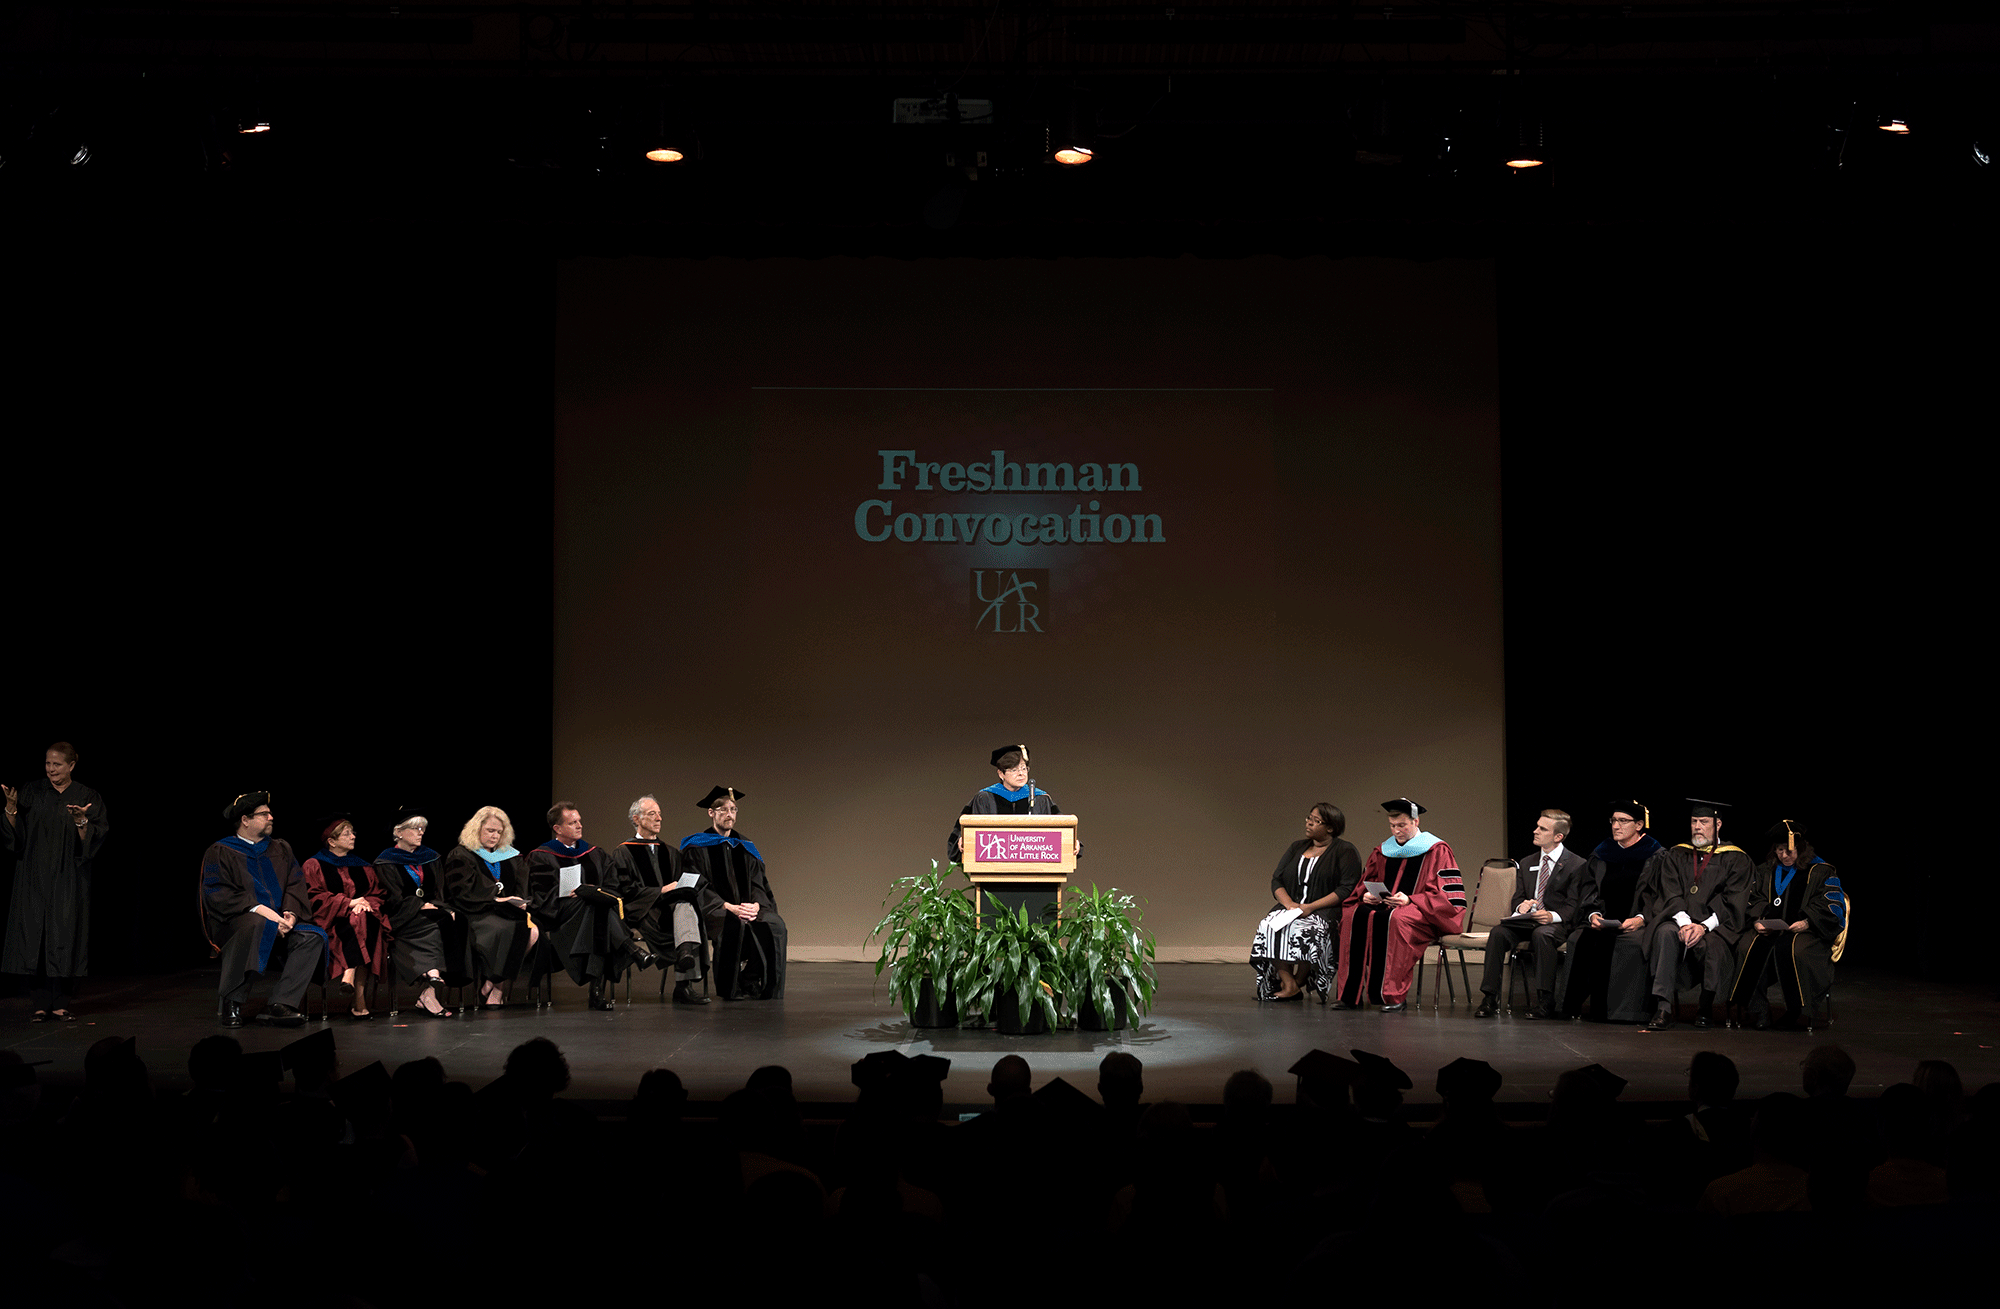 The 2016 Freshman Convocation welcomes the Class of 2020. Photo by Lonnie Timmons III/UALR Communications.